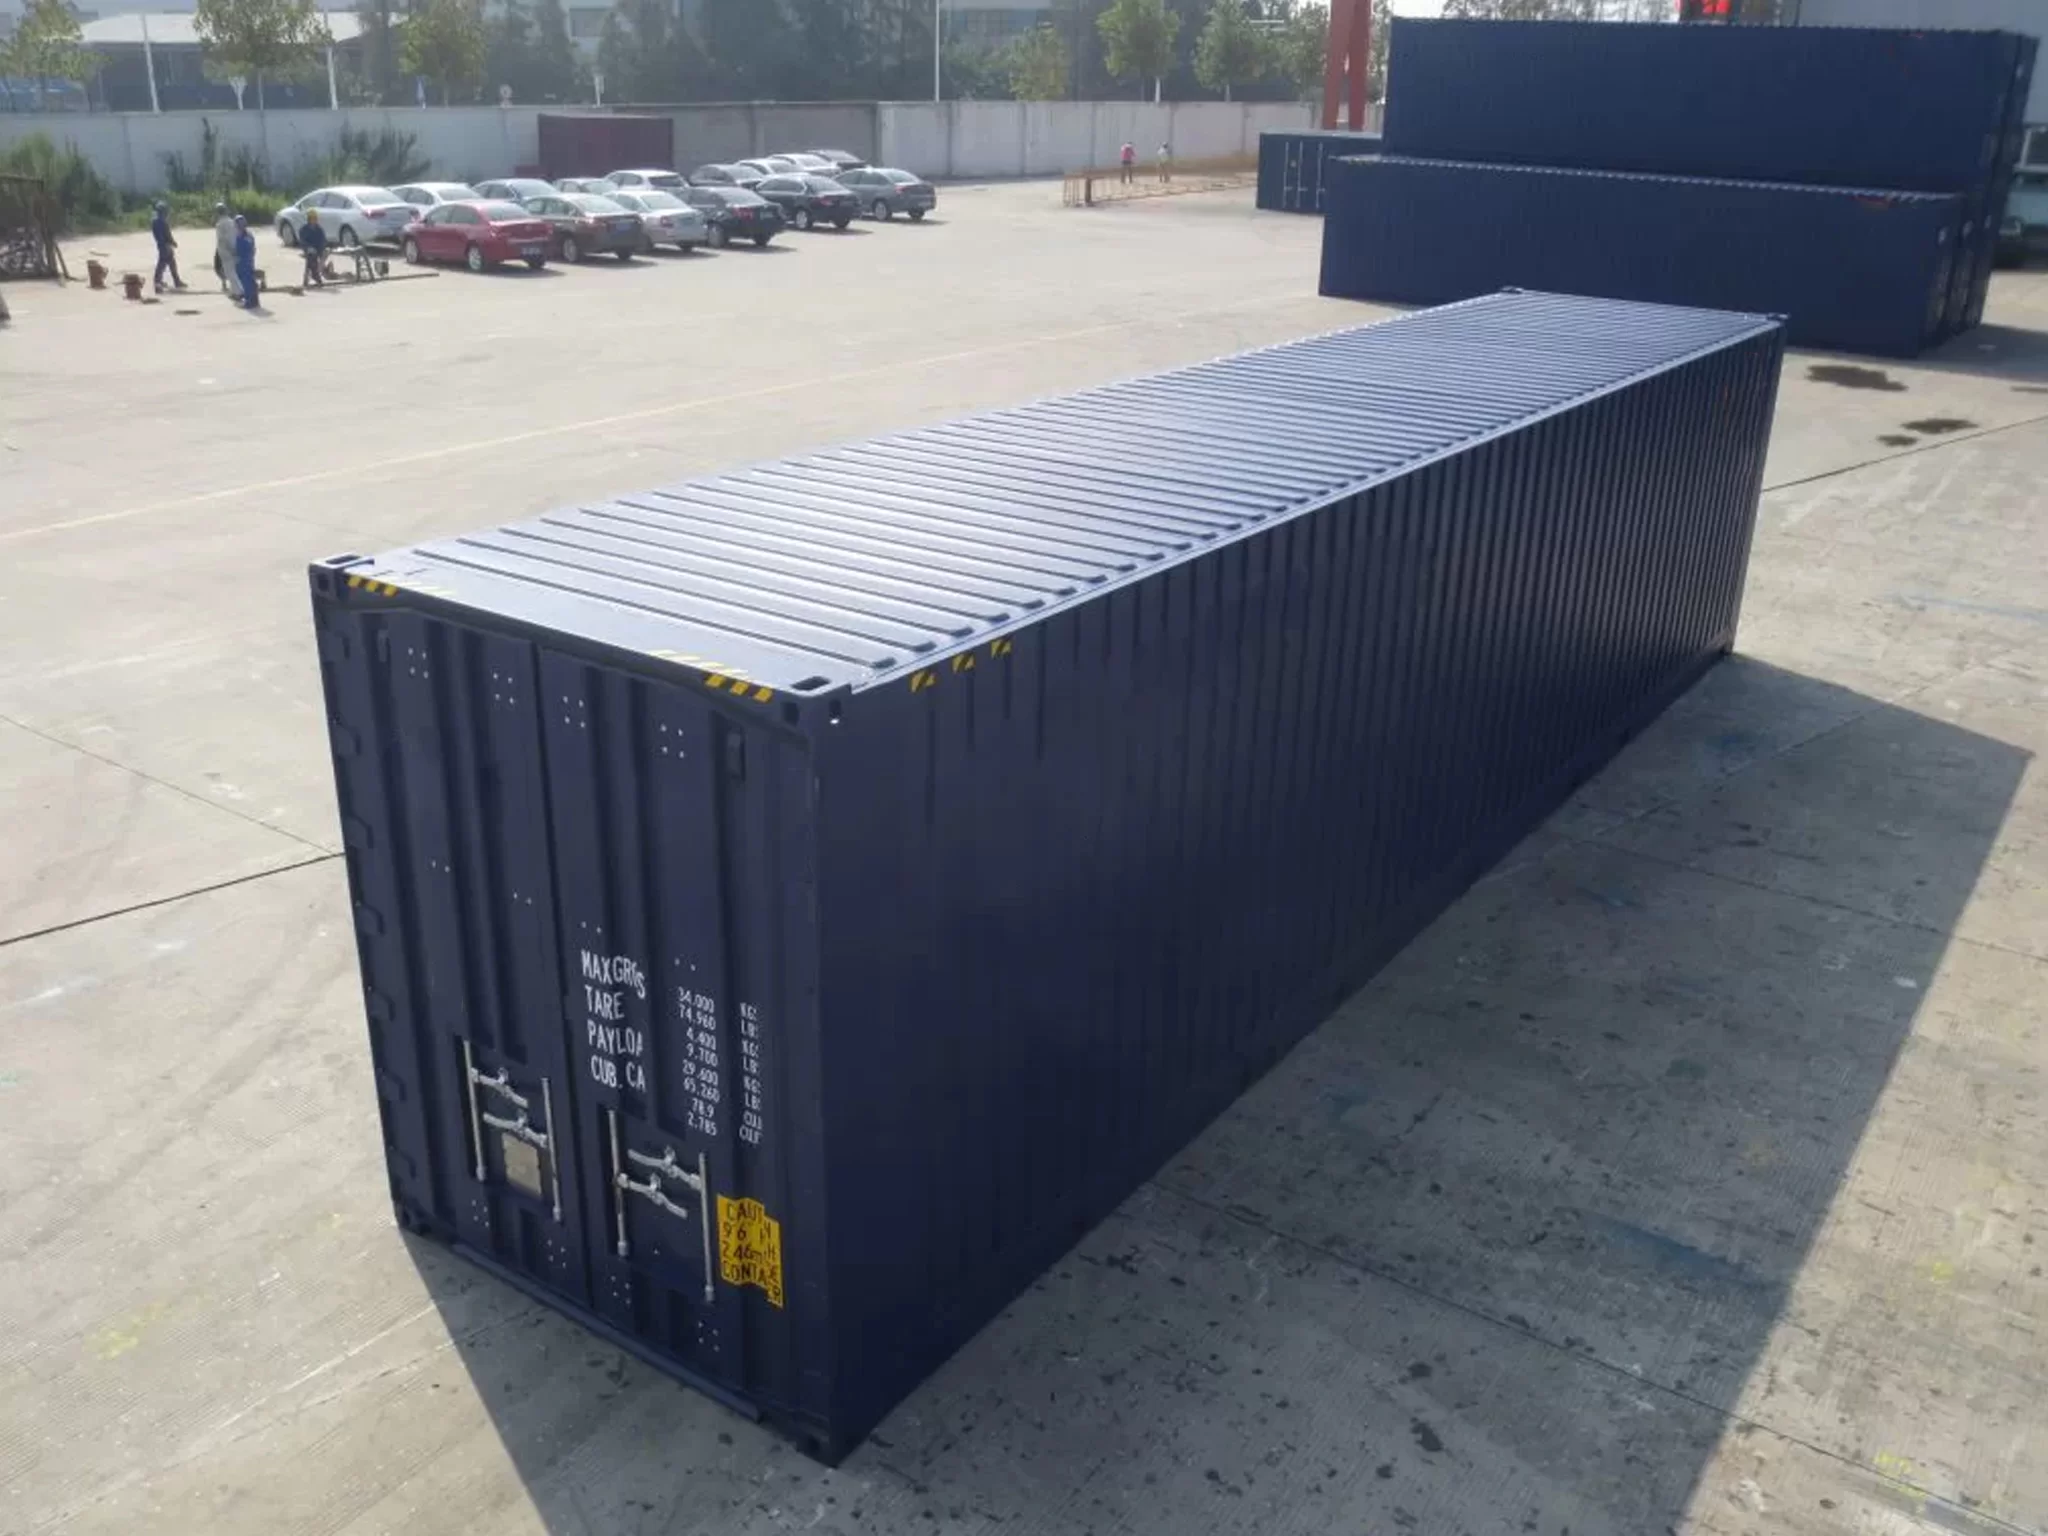 Shipping Containers For Sale in Ontario, California